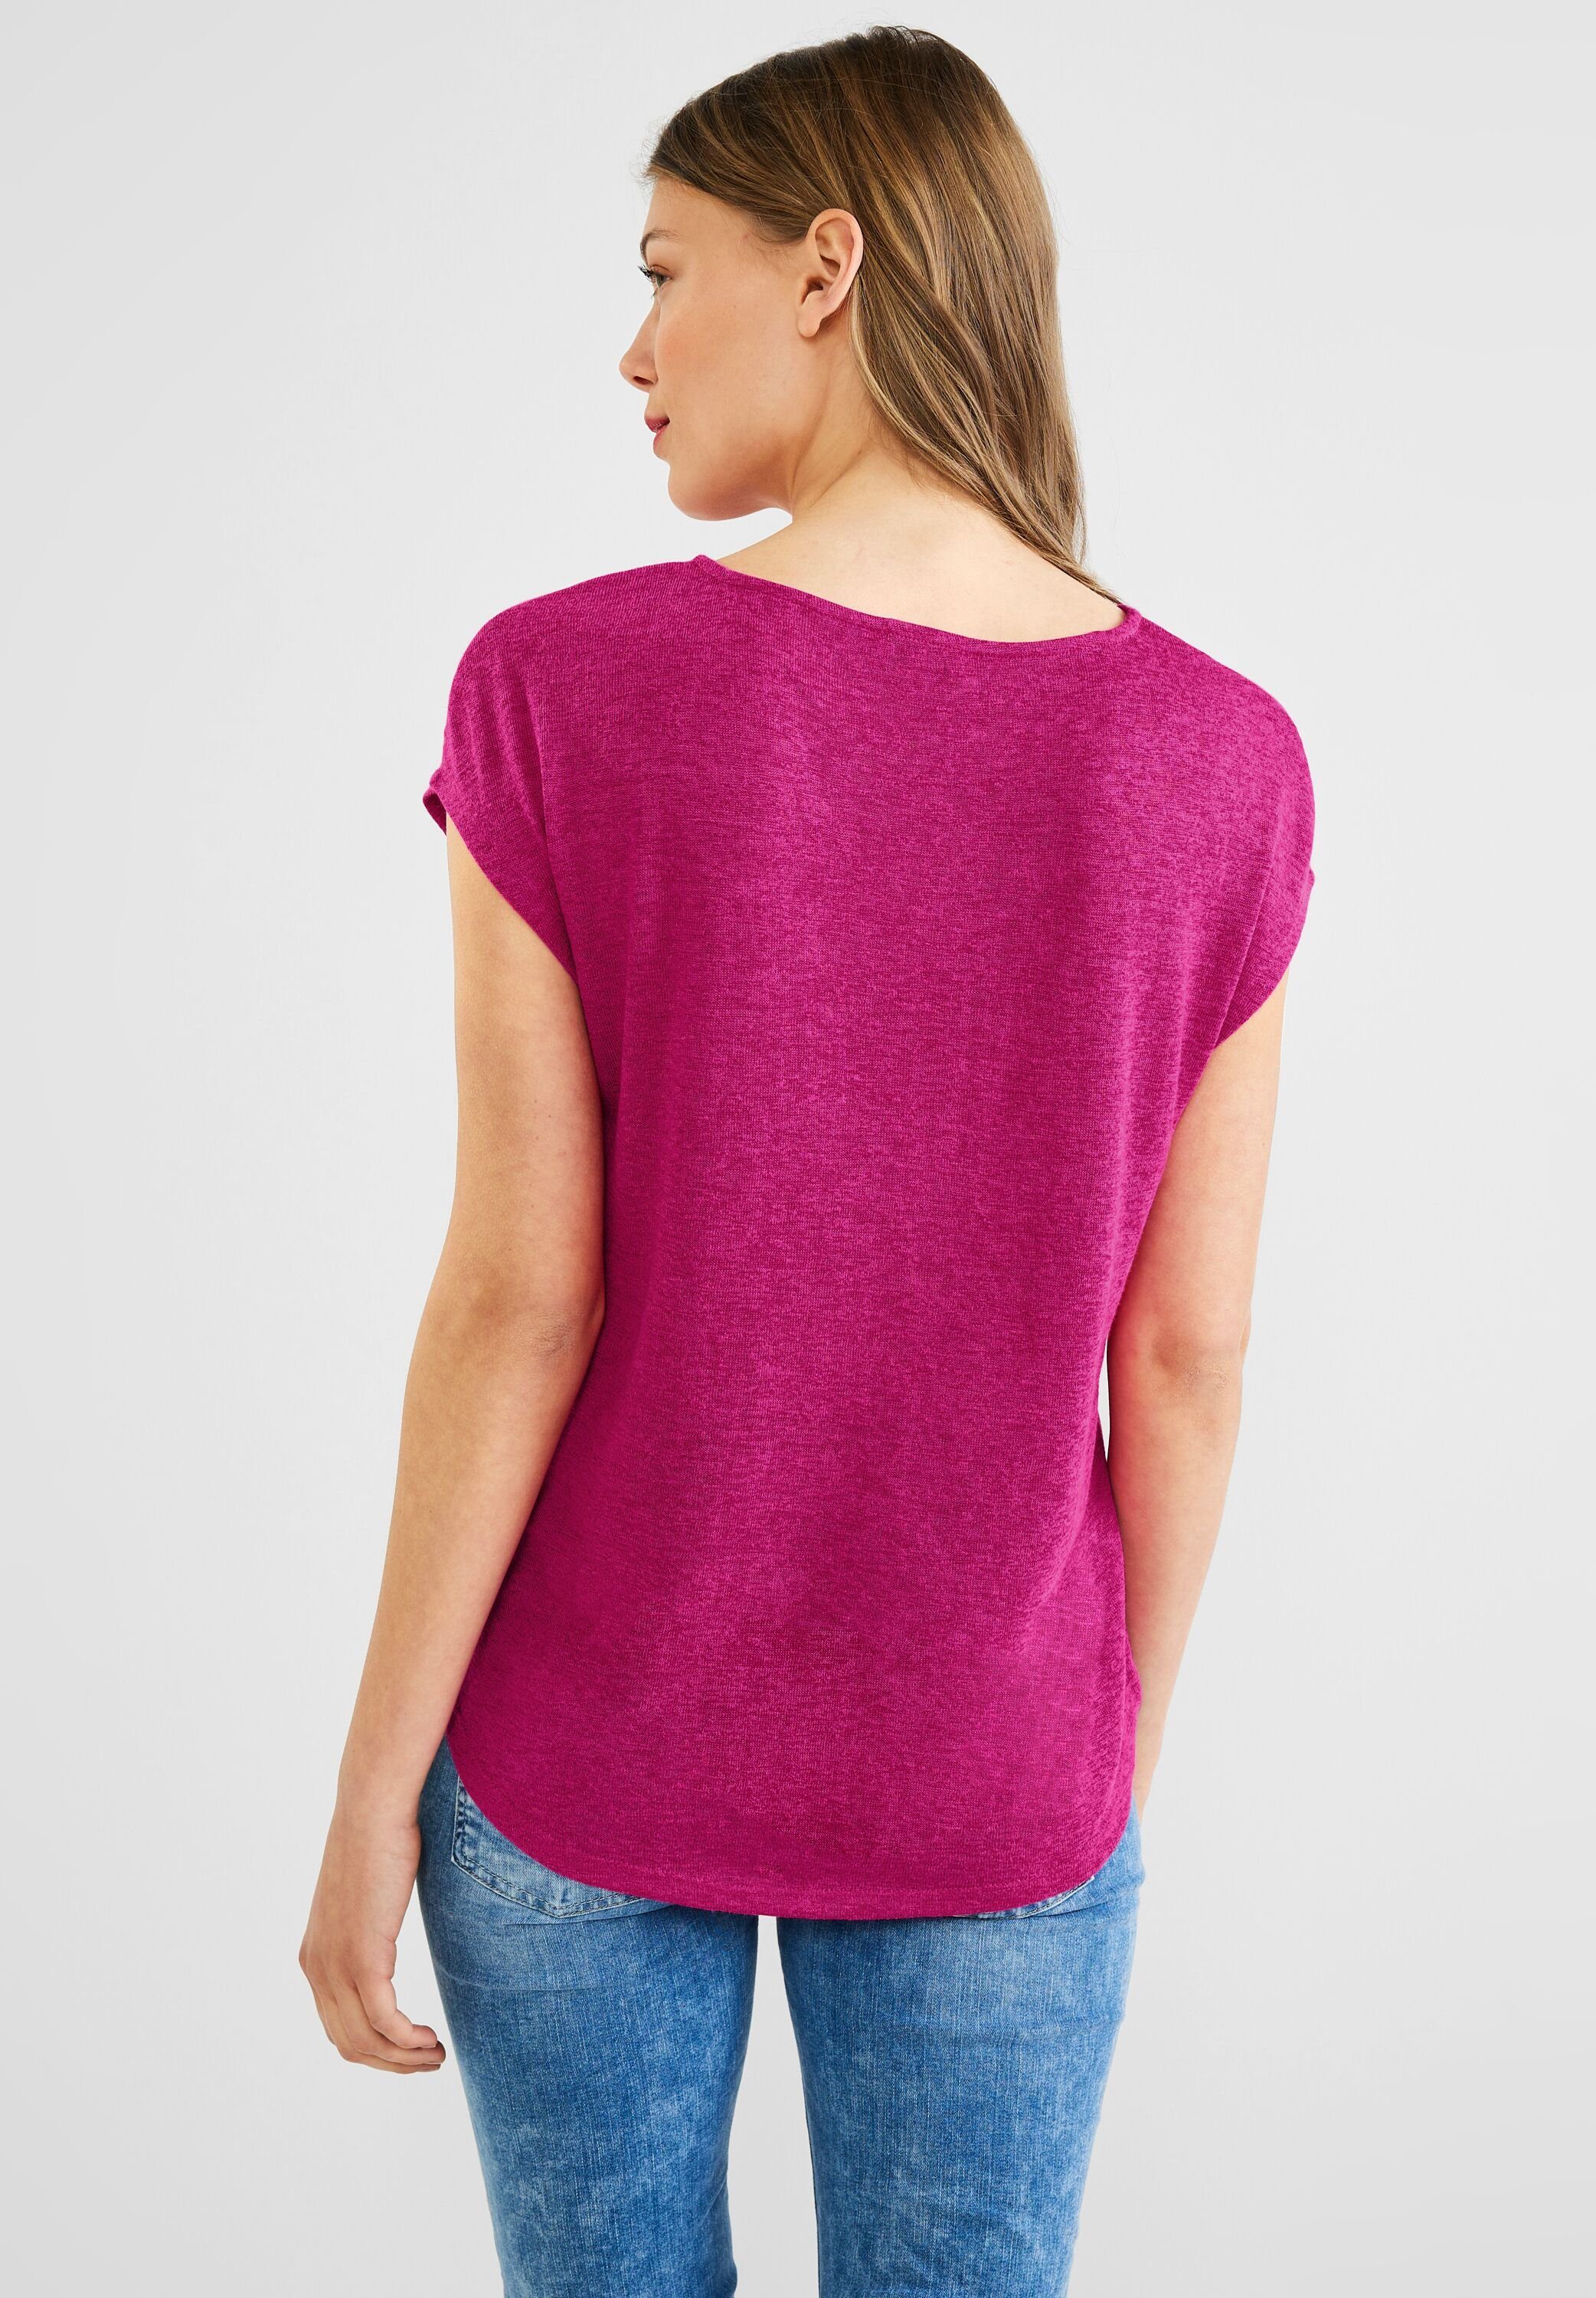 ONE in Unifarbe STREET V-Shirt oasis pink